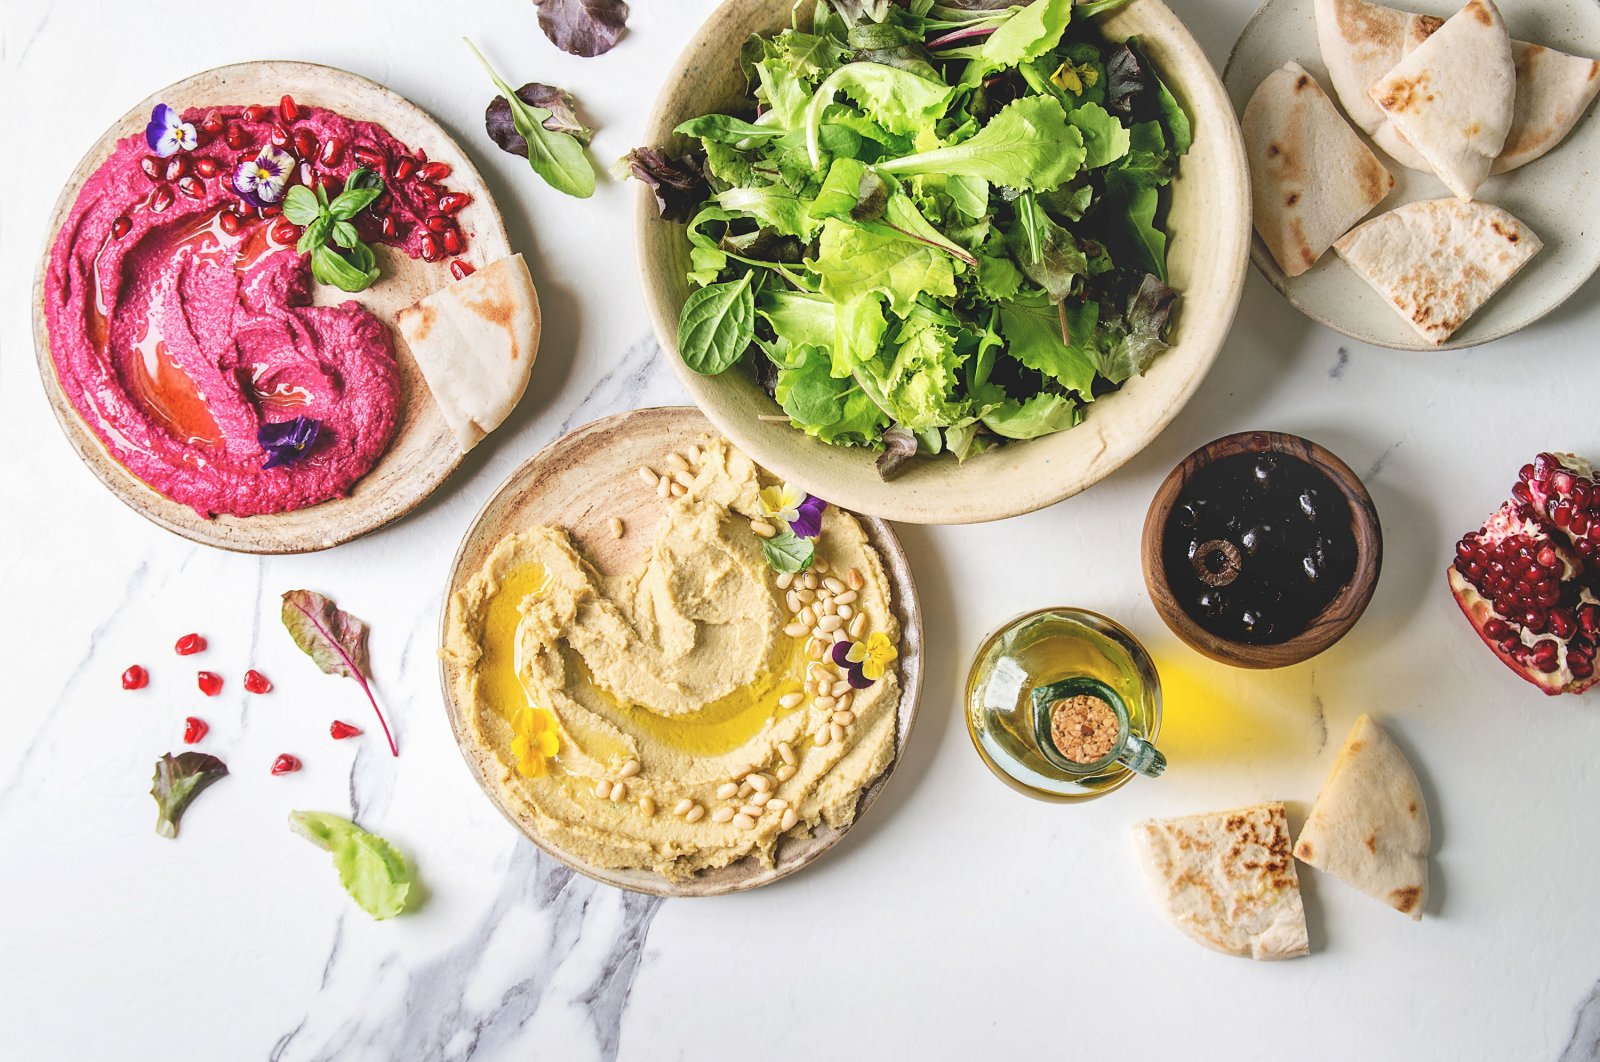 When you crave something colorful, try these variations of hummus. (Getty Images)